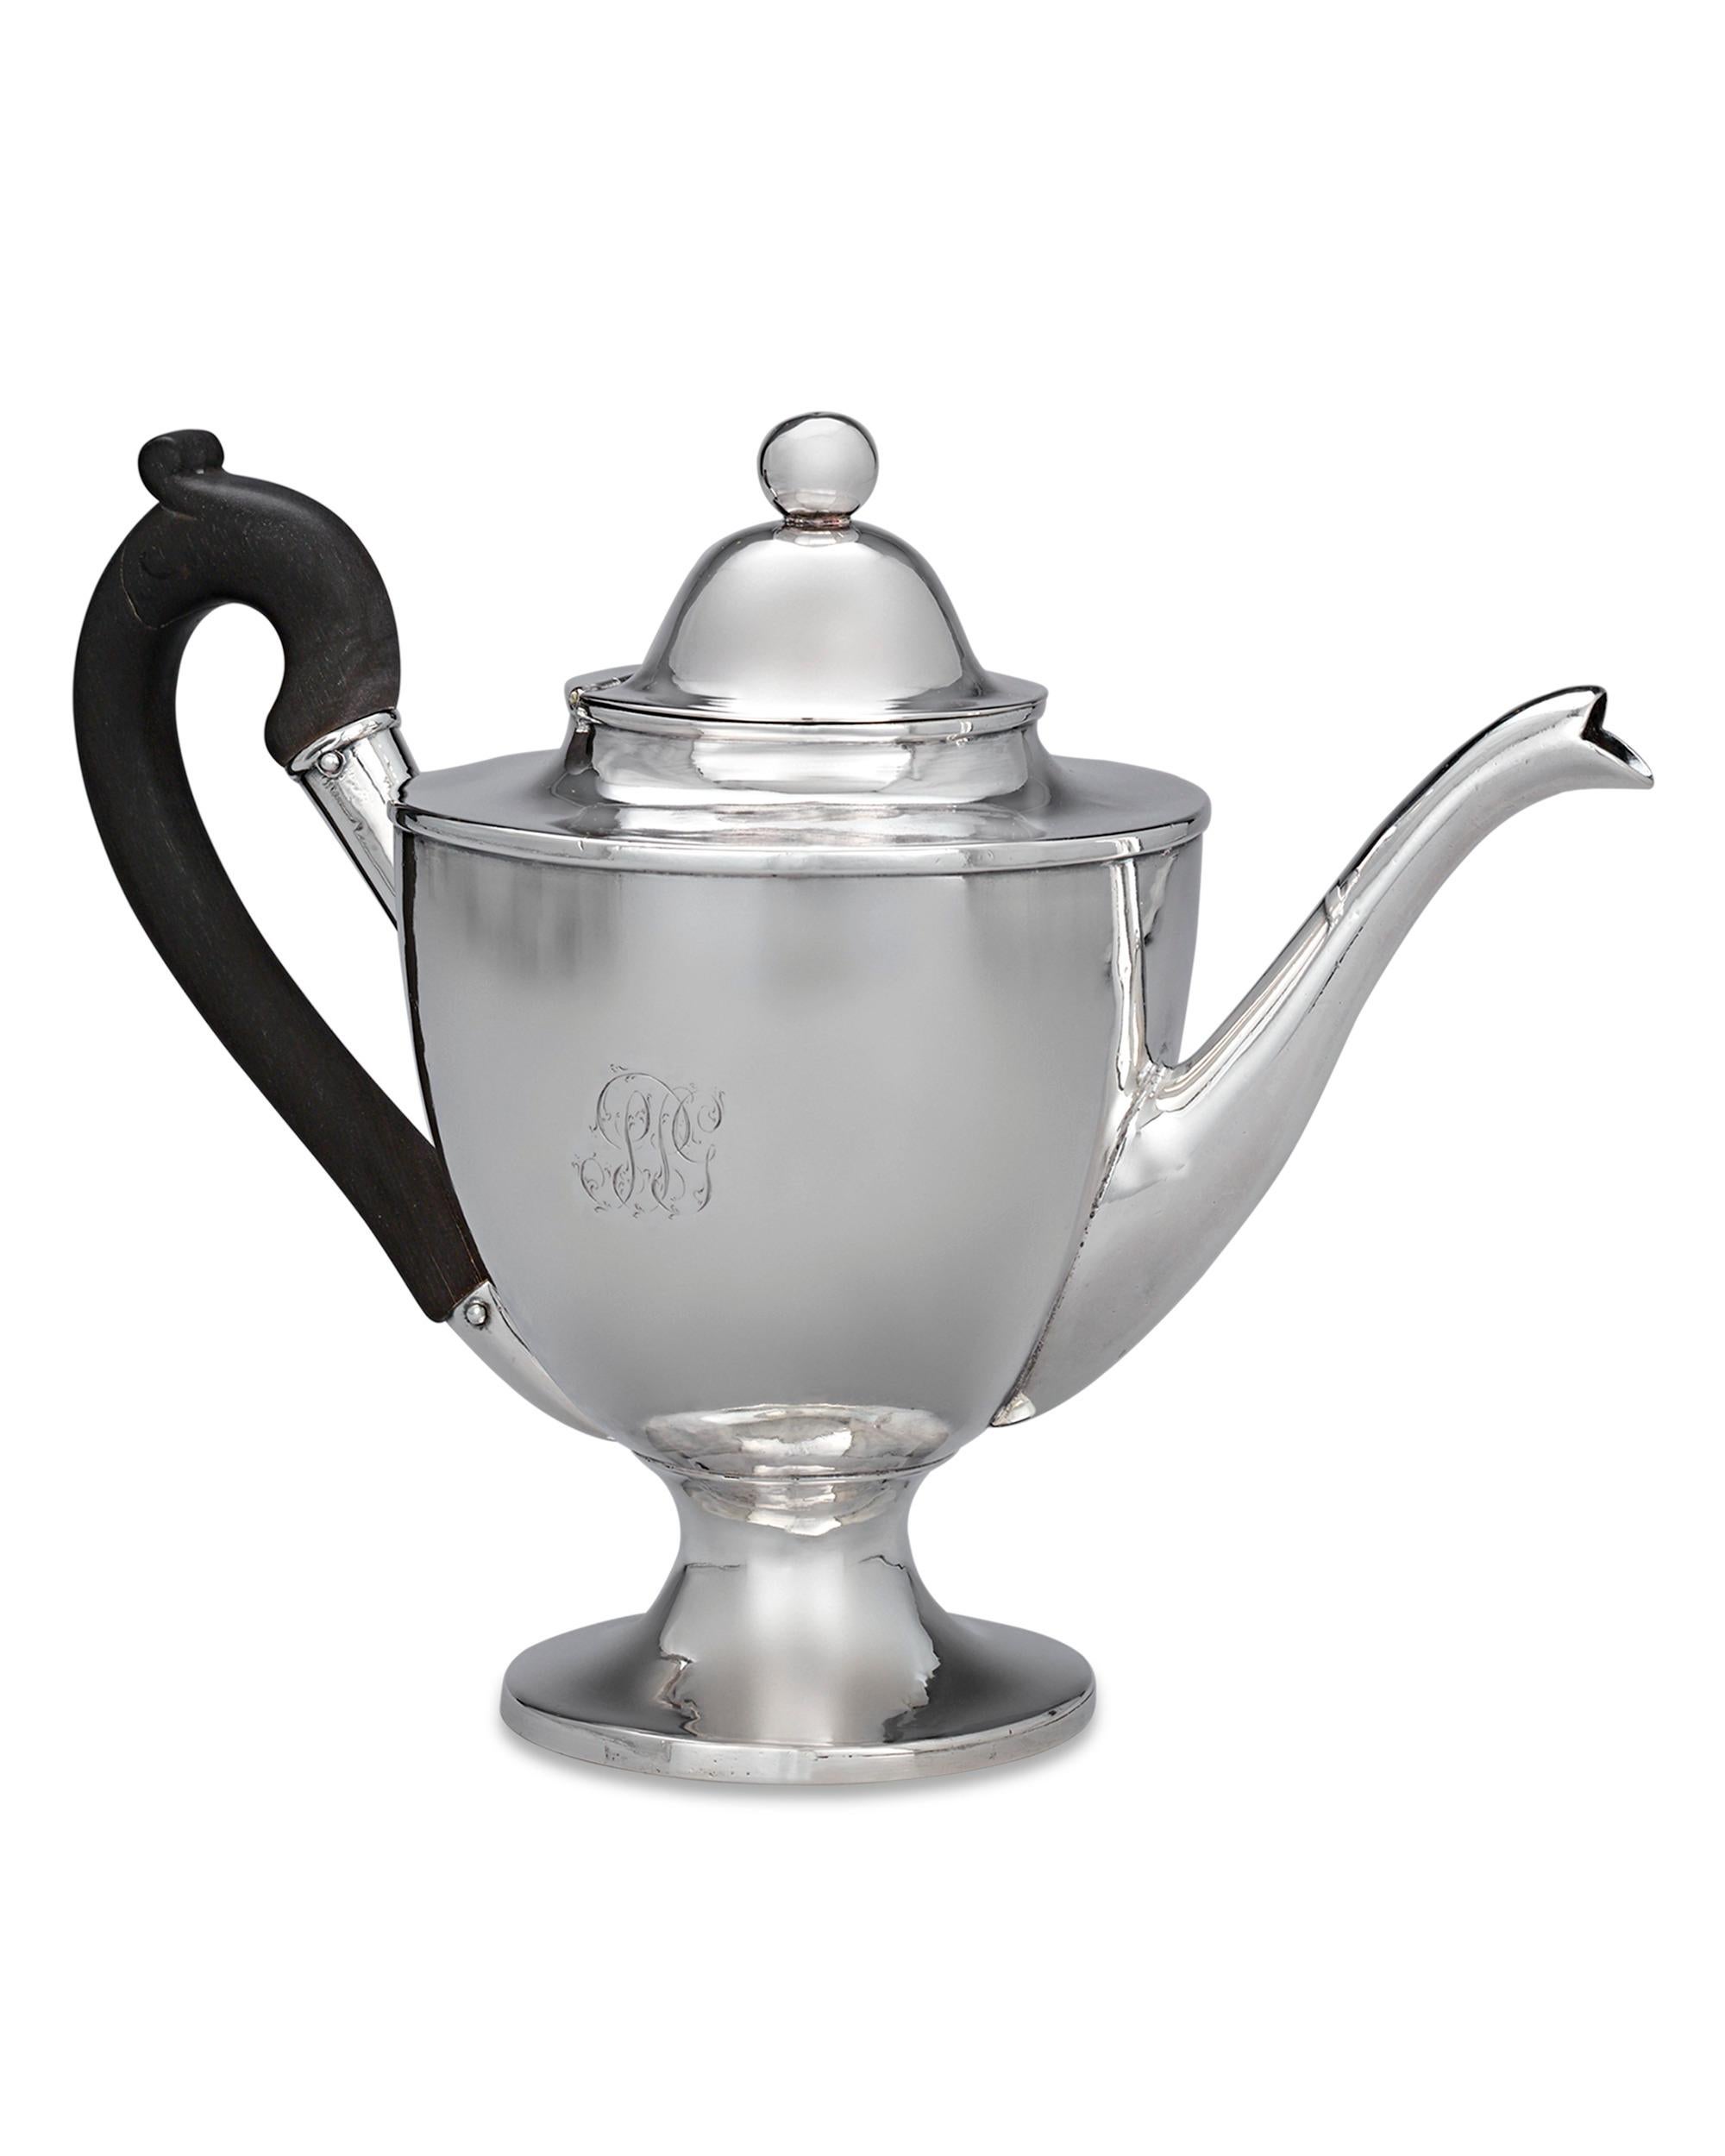 This outstanding antique silver teapot was made by the legendary American patriot and silversmith Paul Revere. This particular pot was made for and bears the monogram of respected Boston businessman Samuel Pickering Gardner (1767-1843) and his wife